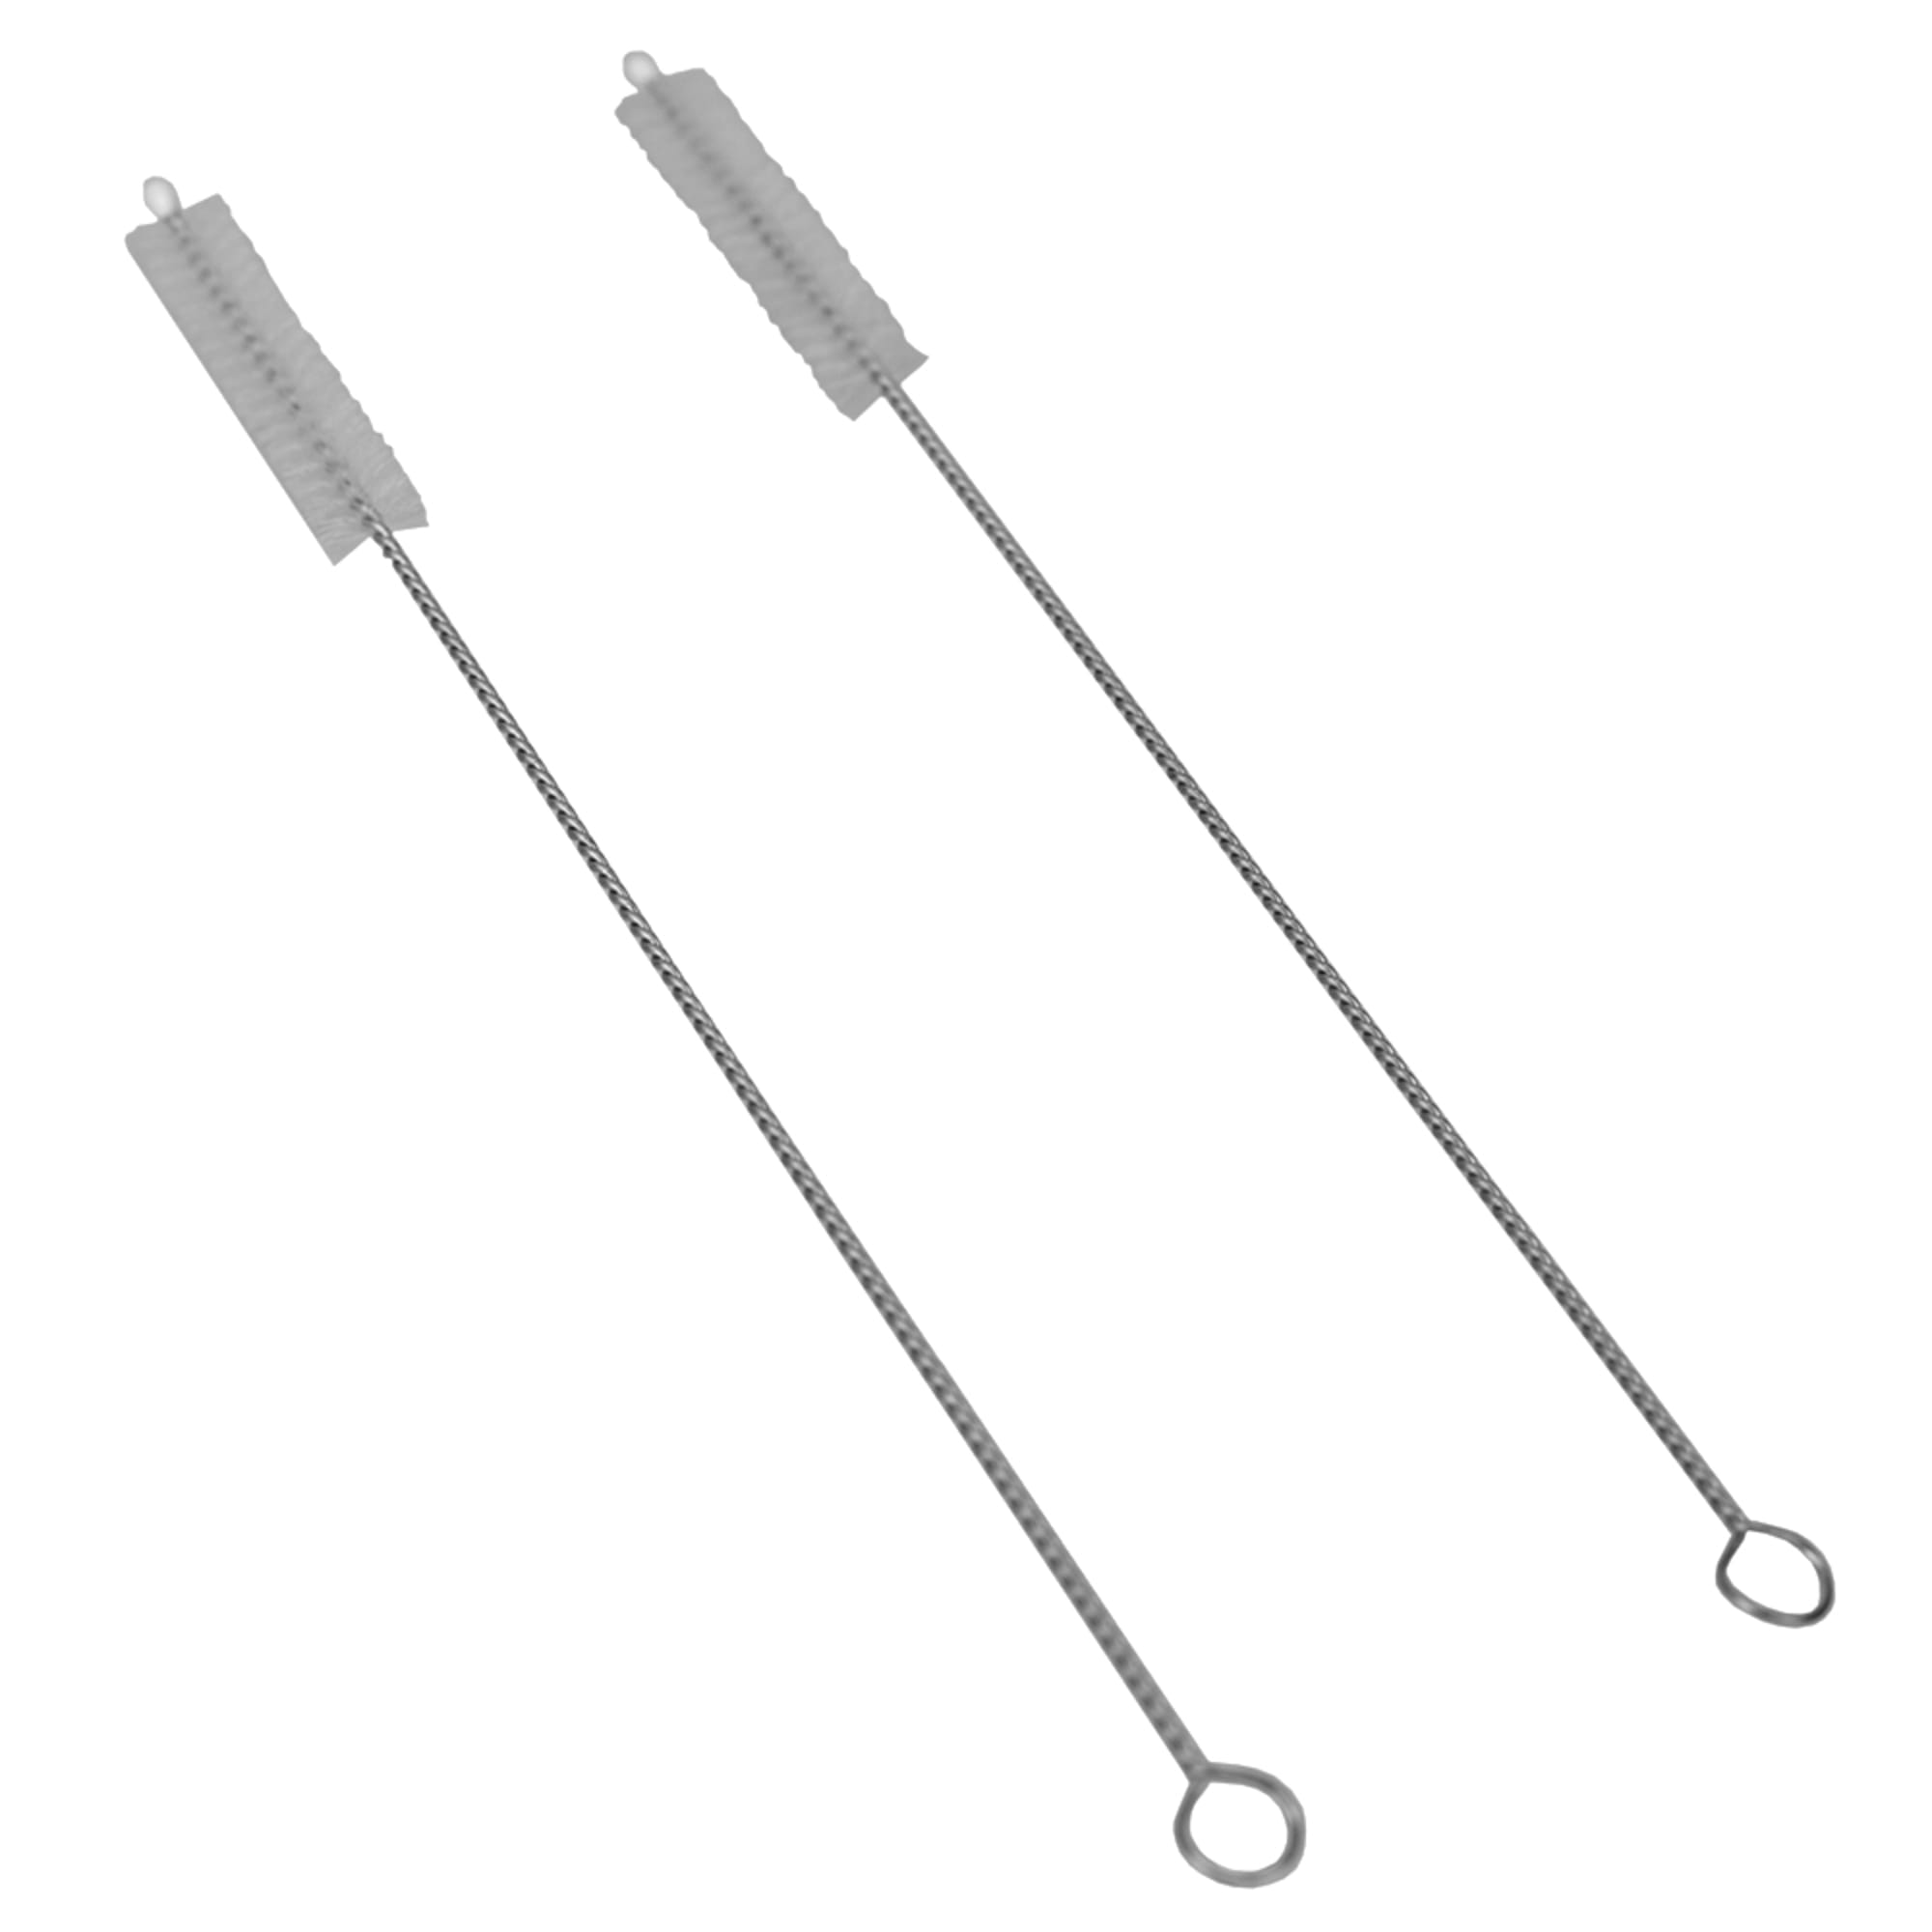 Home Basics Soft Silicone Tip Stainless Steel Straw Set, Multi-color, (Pack of 10) $4.00 EACH, CASE PACK OF 24